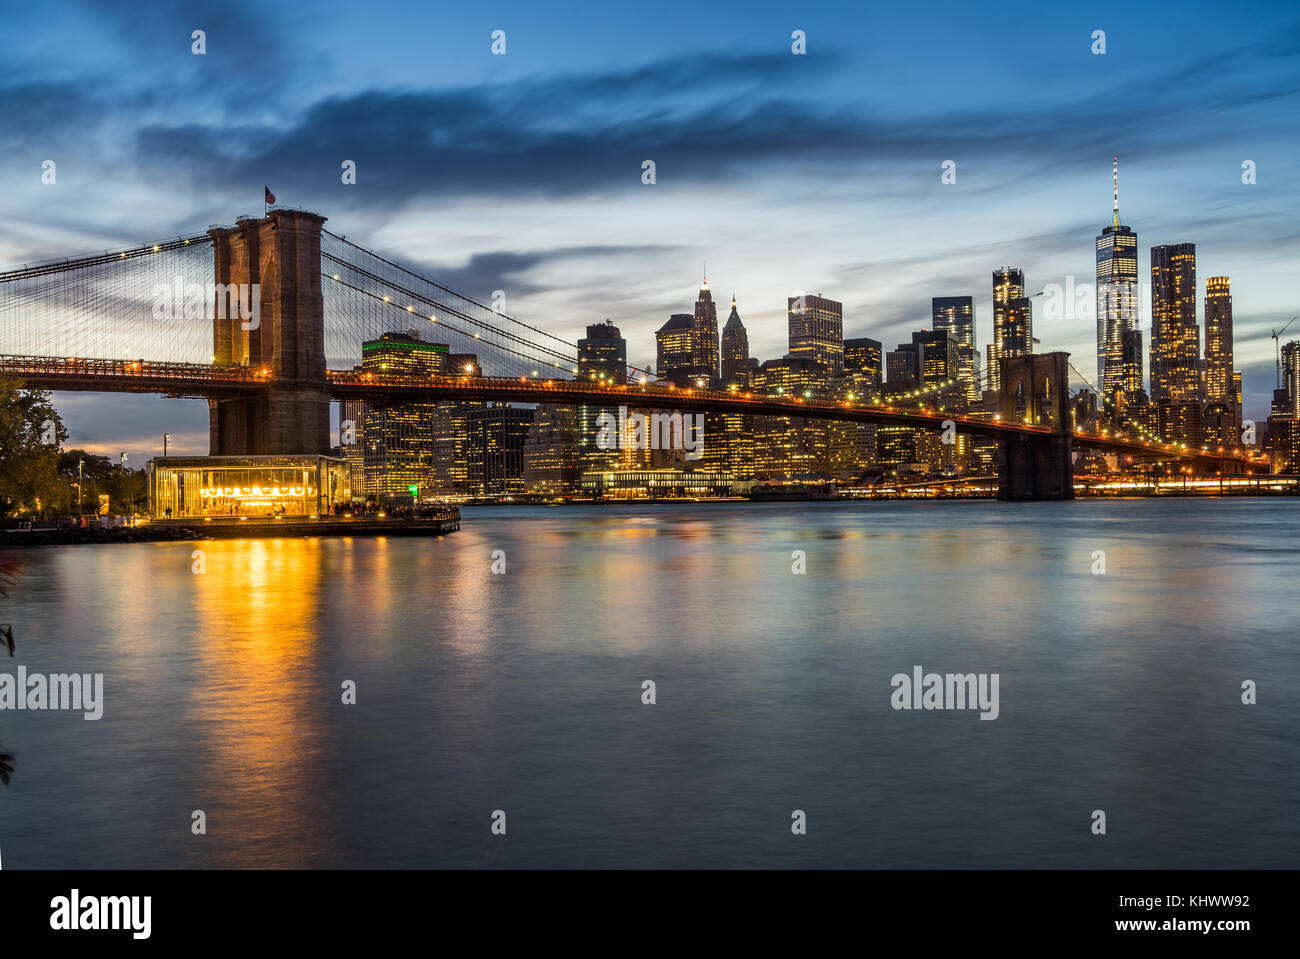 Evening view of Illuminated Downtown Manhattan with Brooklyn Bridge from Brooklyn Dumbo area Stock Photo